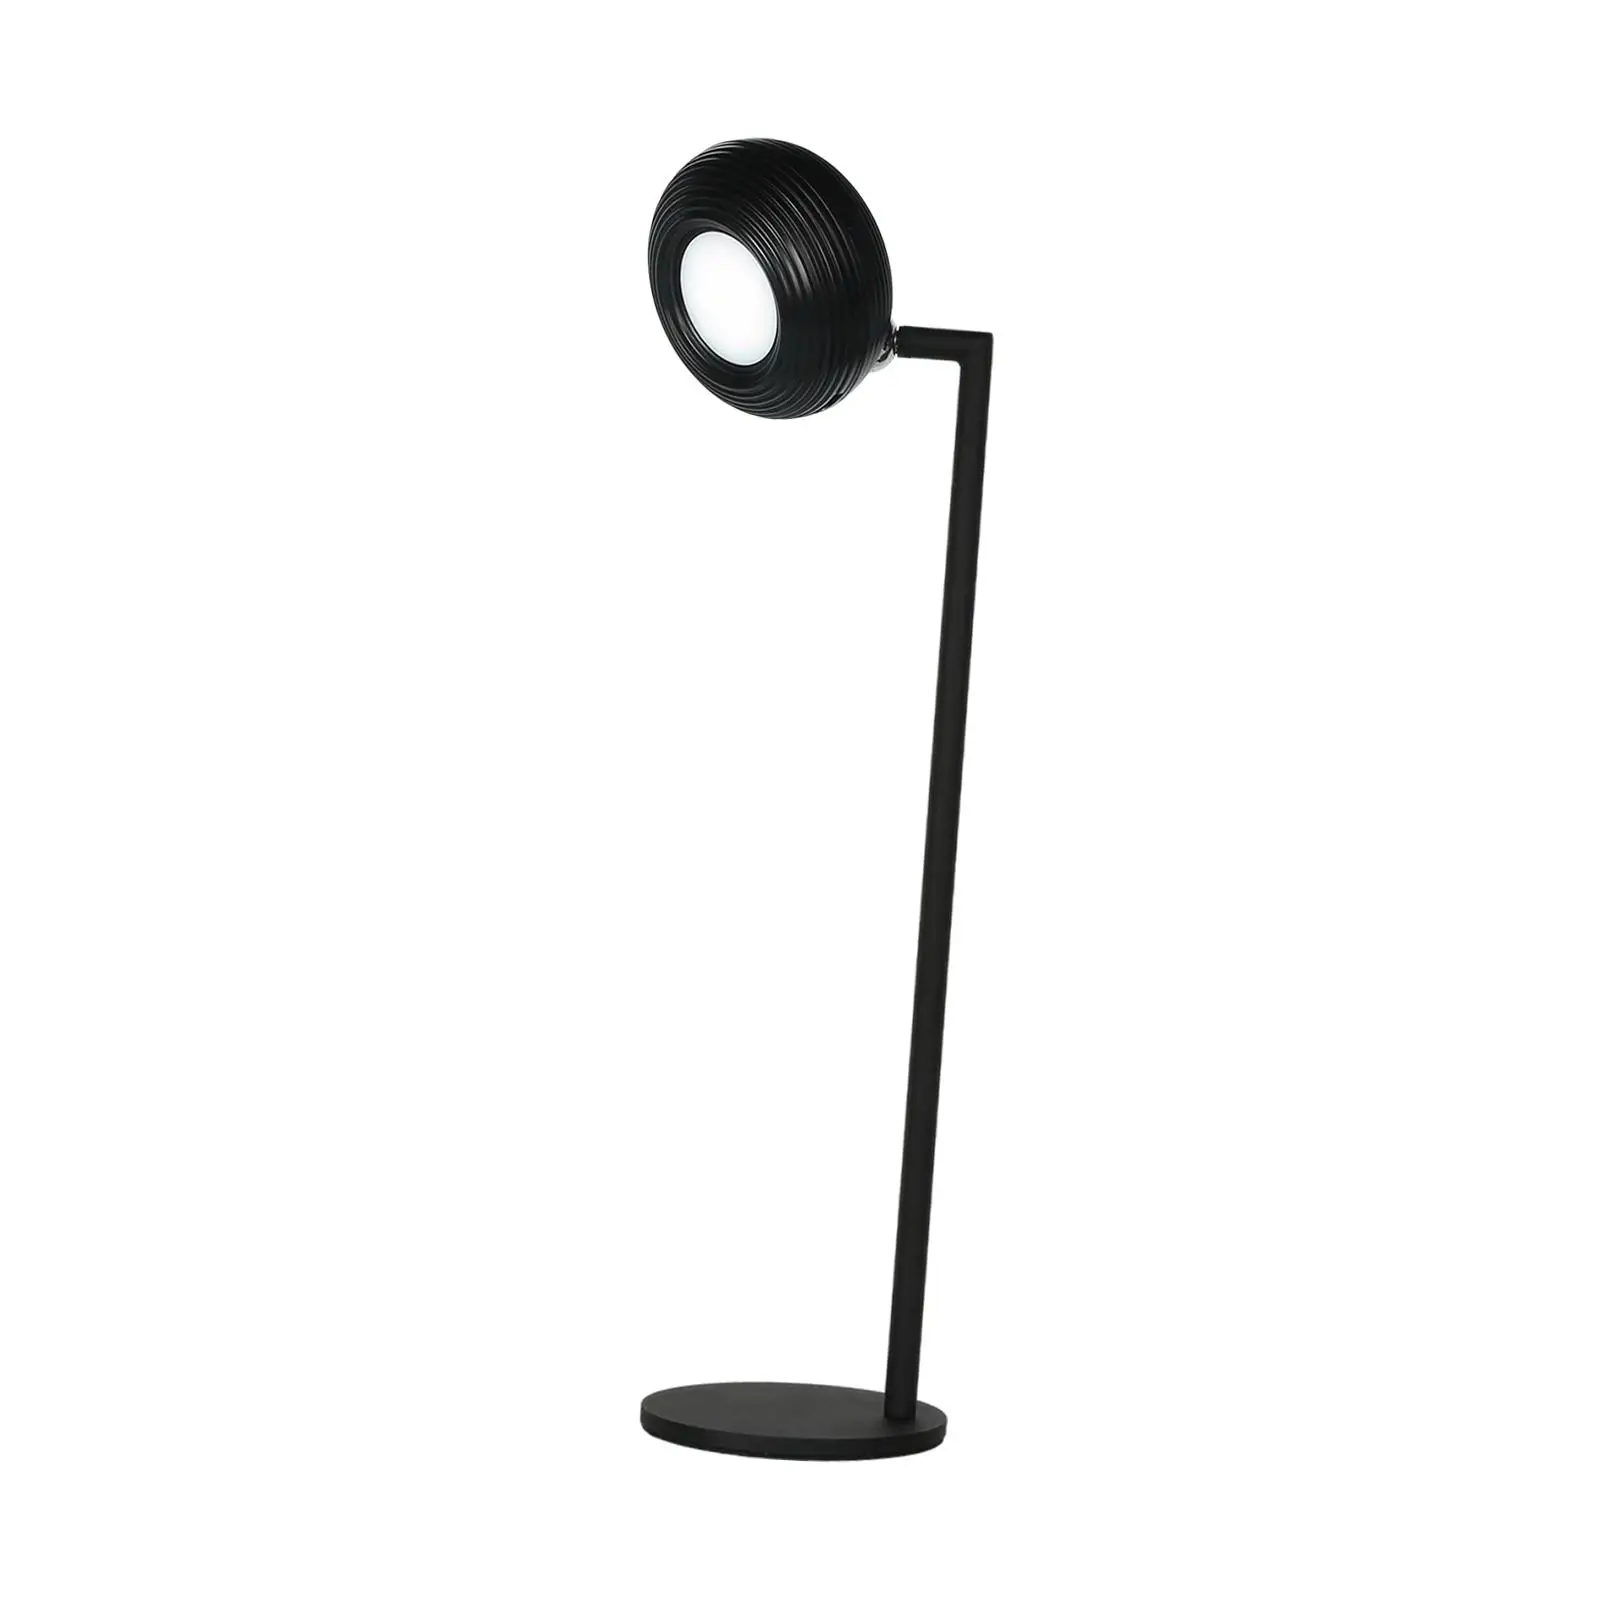 2 in 1 Desk Lamp 3 Levels of Brightness Office Lamp for Reading Home Office